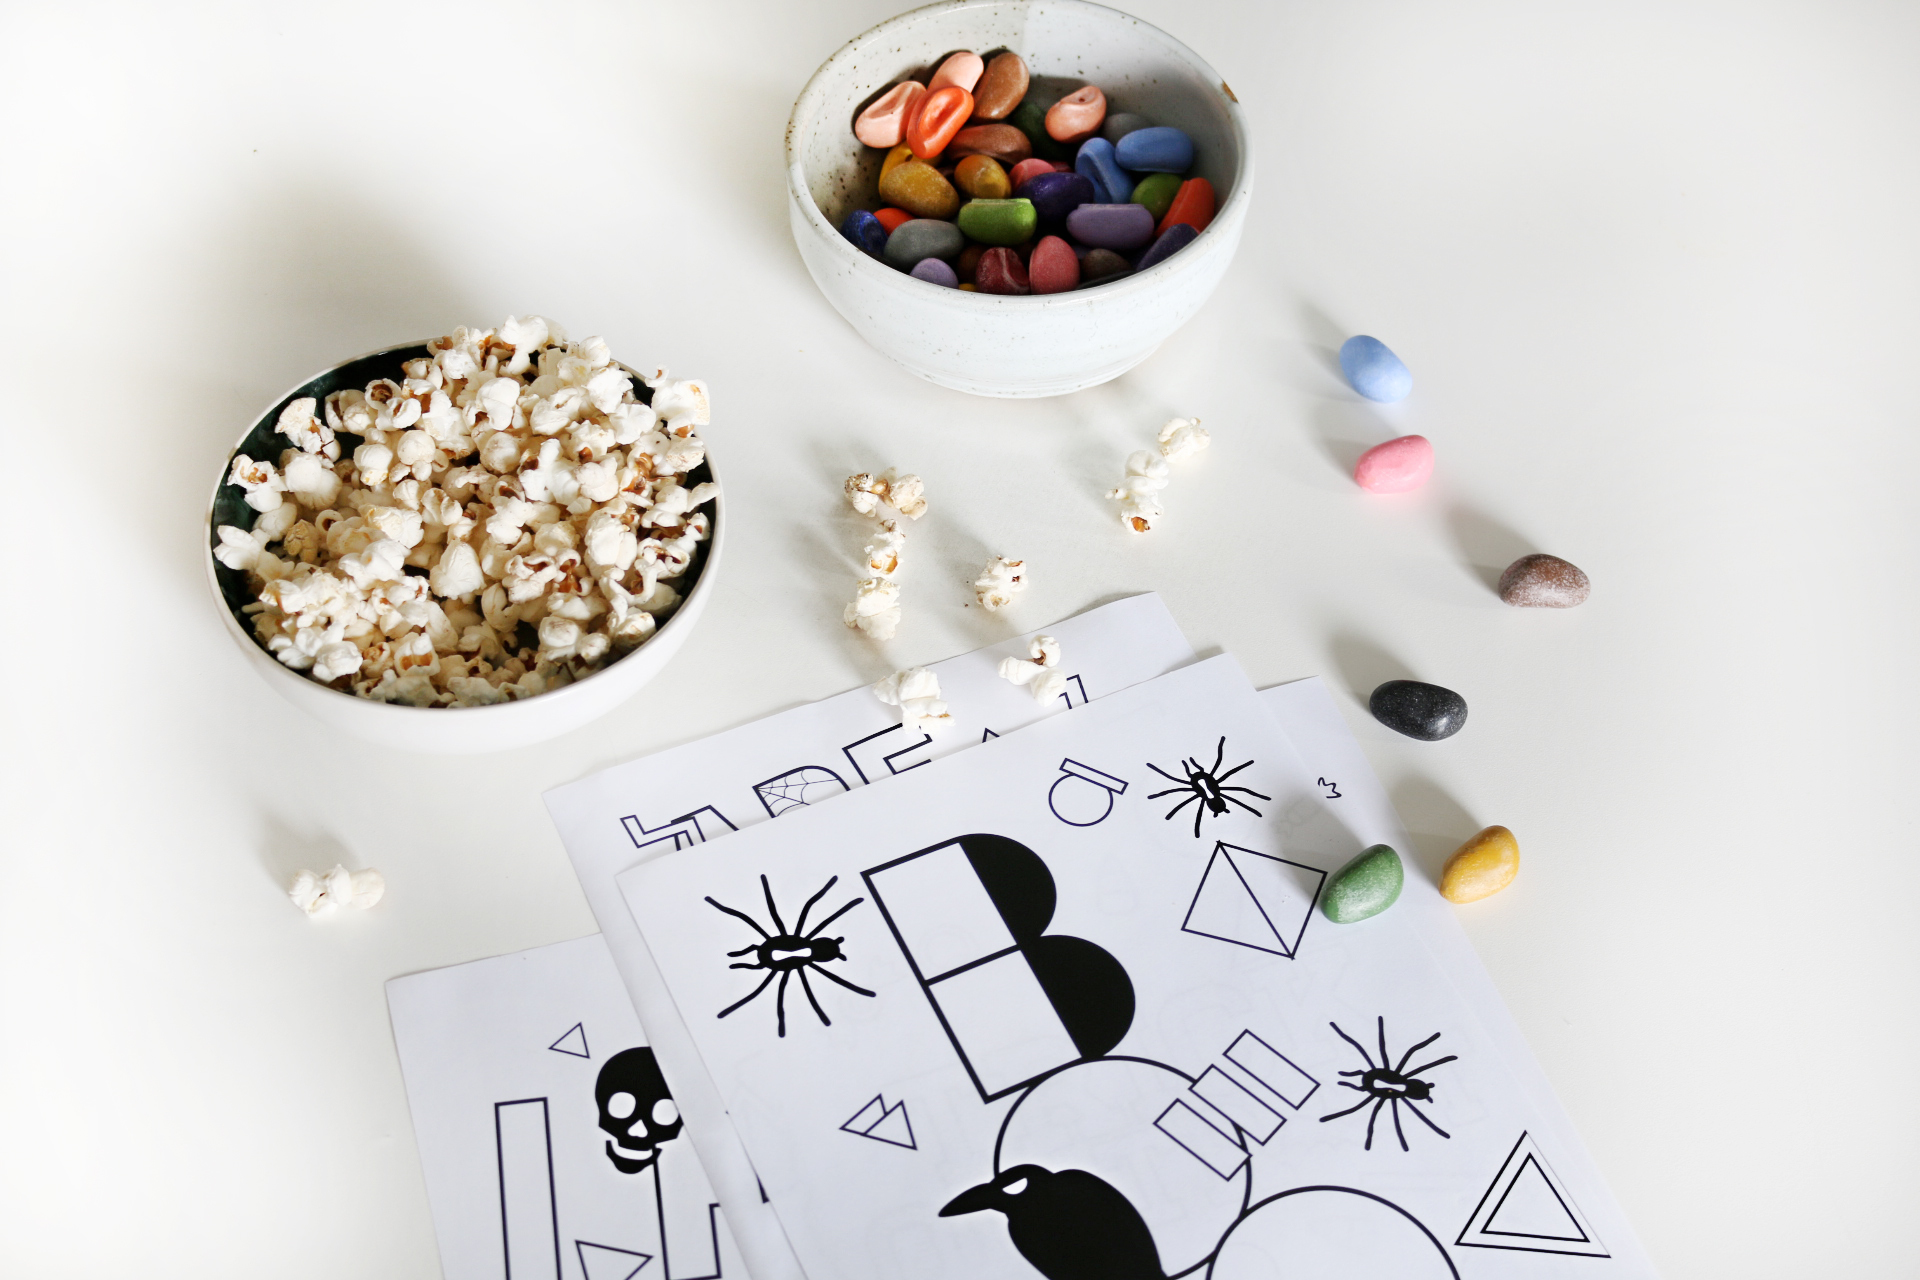 popcorn and candy along with black and white painting